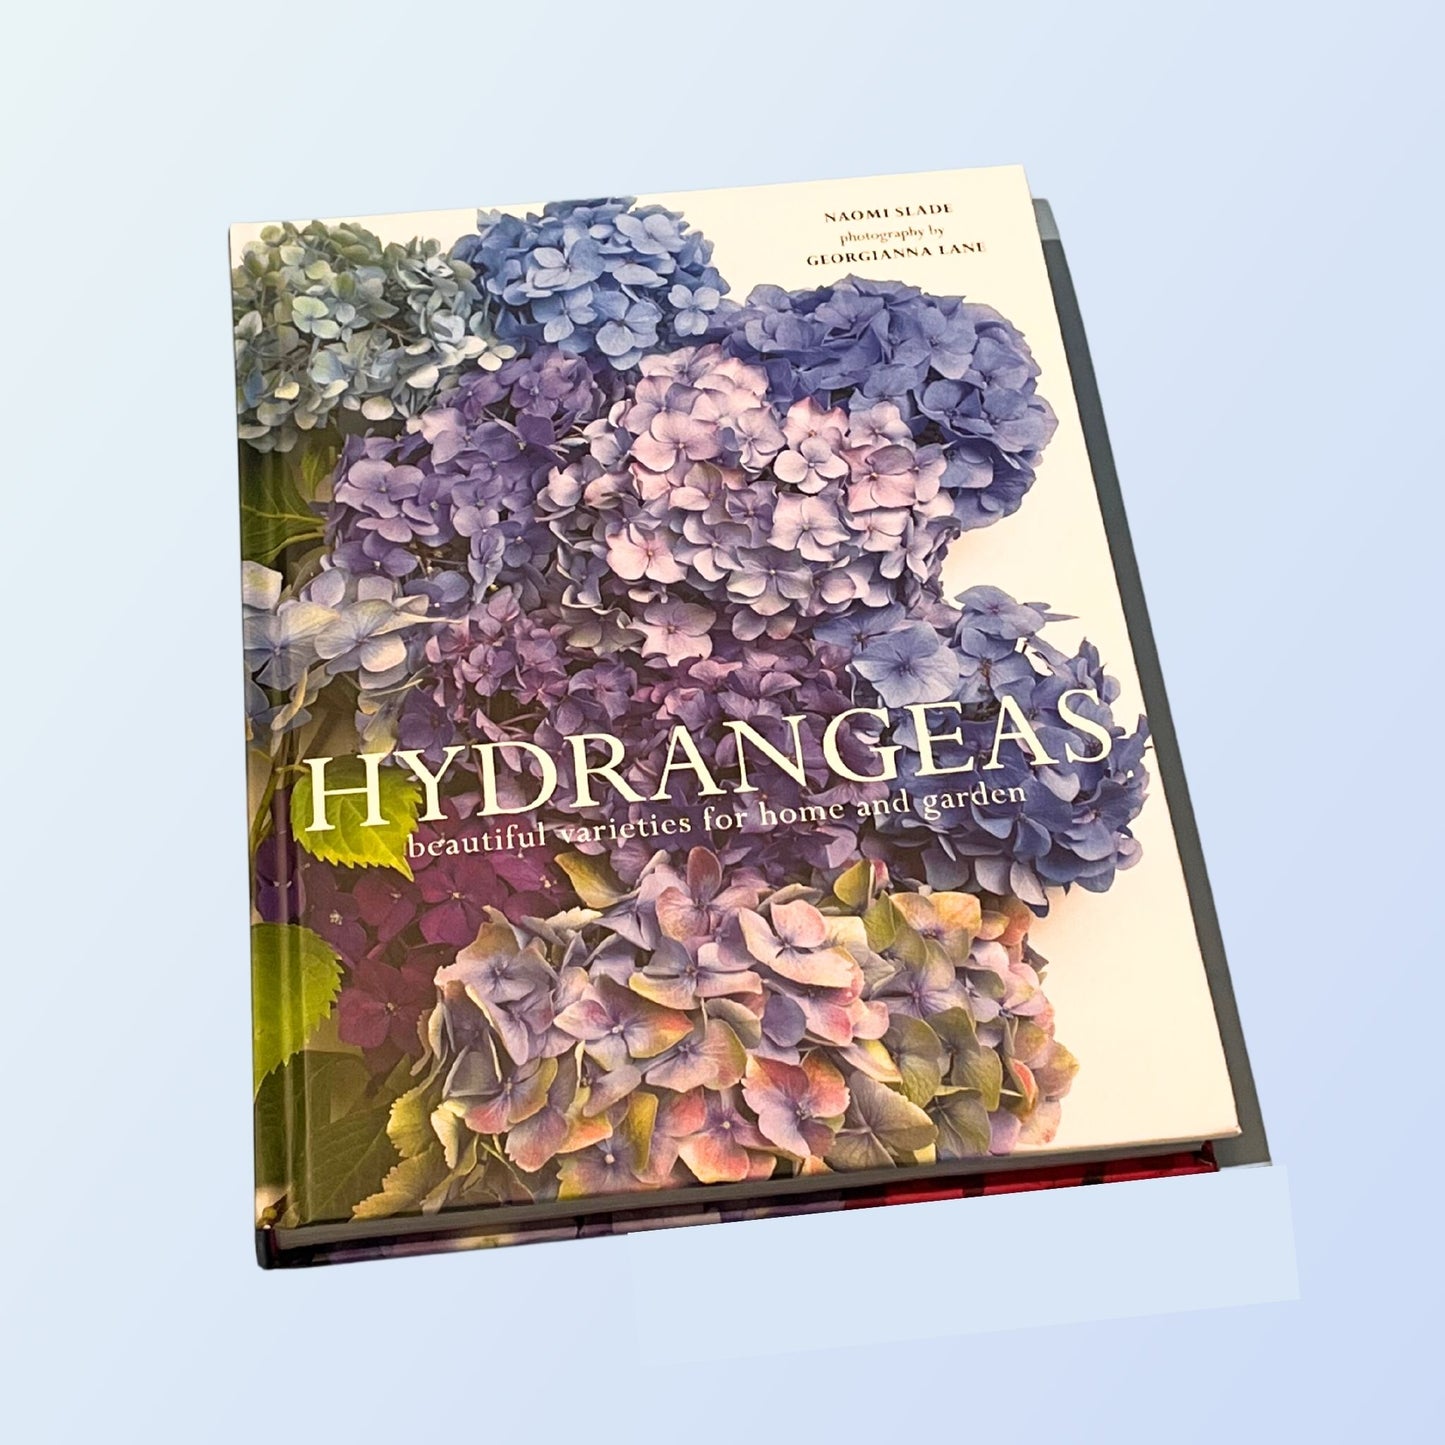 "Hydrangeas: Beautiful Varieties for Home and Garden" Coffee Table Book by Naomi Slade and Georgianna Lane